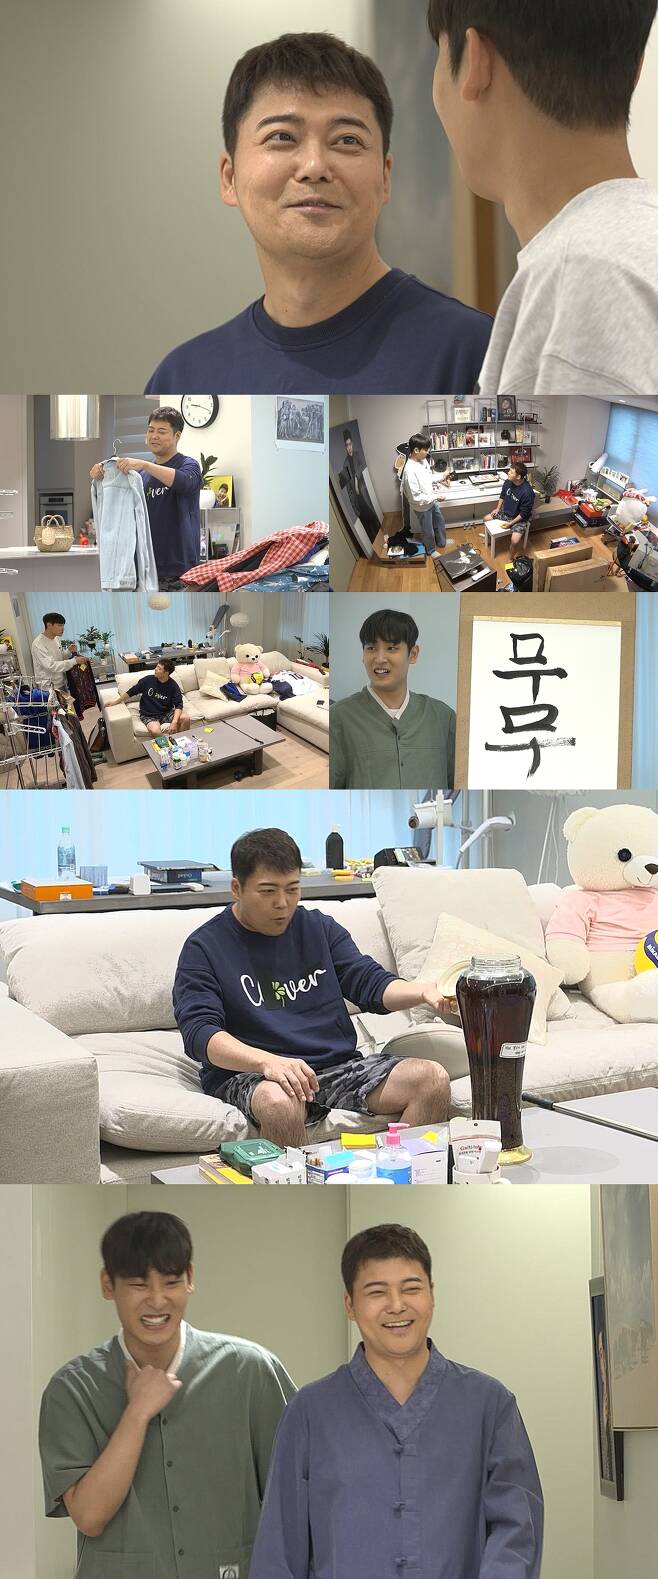 Jun Hyun-moo of I Live Alone will hold a Donation Party Free Meeting with YG Entertainment.MBC I Live Alone (director Huh Hang Kim Ji-woo), which will air at 11:20 p.m. on September 24, unveiled a still featuring the site of the Donation Partys Free Trade Fair, which was directly YG Entertainment by Jun Hyun-moo.The Muslimist End King, held at the house of Jun Hyun-moo, was conducted by using a method of entering two teams per hour as a part-time system in compliance with the anti-virus rules.In the middle of Jun Hyun-moos living room, objects are captured and taken away from the eye. Four years ago, the night gate of greed was dipped.From indoor riding exercise equipment to the piano purchased for a single fan meeting, Jun Hyun-moos touch will be filled with extraordinary objects to cause a loud noise.In the emergence of unexpected objects, Jun Hyun-moo hastily asked someone for SOS, and Park Jae-jung appears as a part-time student and focuses attention.Park Jae-jung has been talking about I Live Alone in showing off his skillful used trading ability as a uniform collector.Park Jae-jung, a collector of Jata, is caught in a room of Jun Hyun-moo and is caught in silence.Park Jae-jung then stimulates curiosity by saying that he will go to a used transaction honey tip lecture for Jun Hyun-moo.Jun Hyun-moo said, The professional area is very strong because it is a used transaction. It is the back door that has created infinite trust for Park Jae-jung, a part-time student.